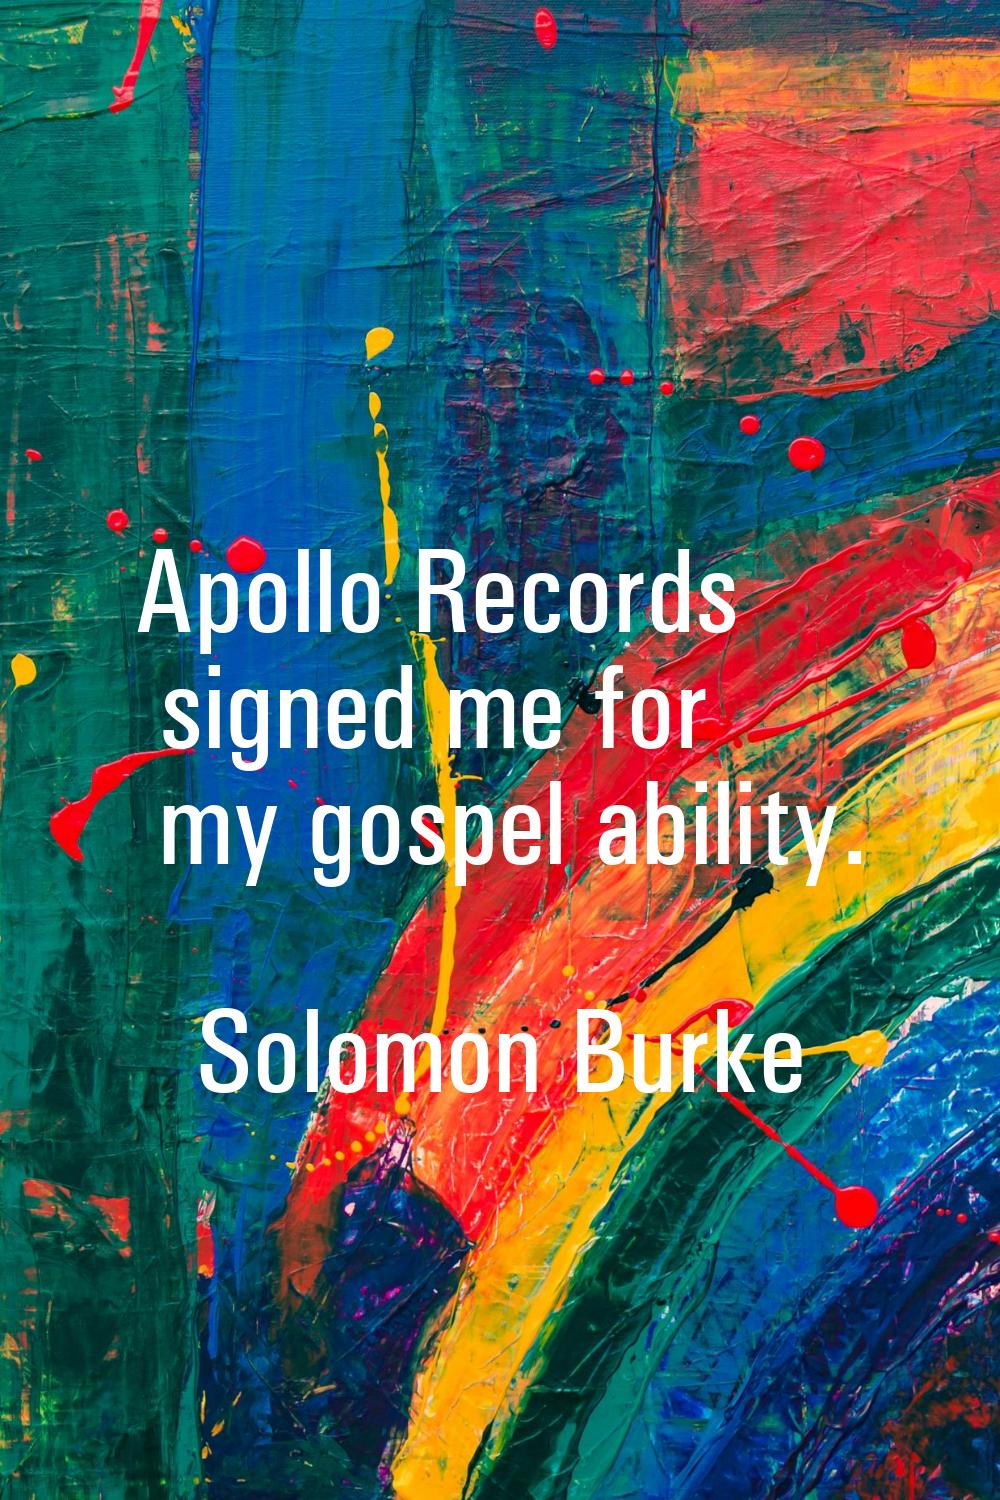 Apollo Records signed me for my gospel ability.